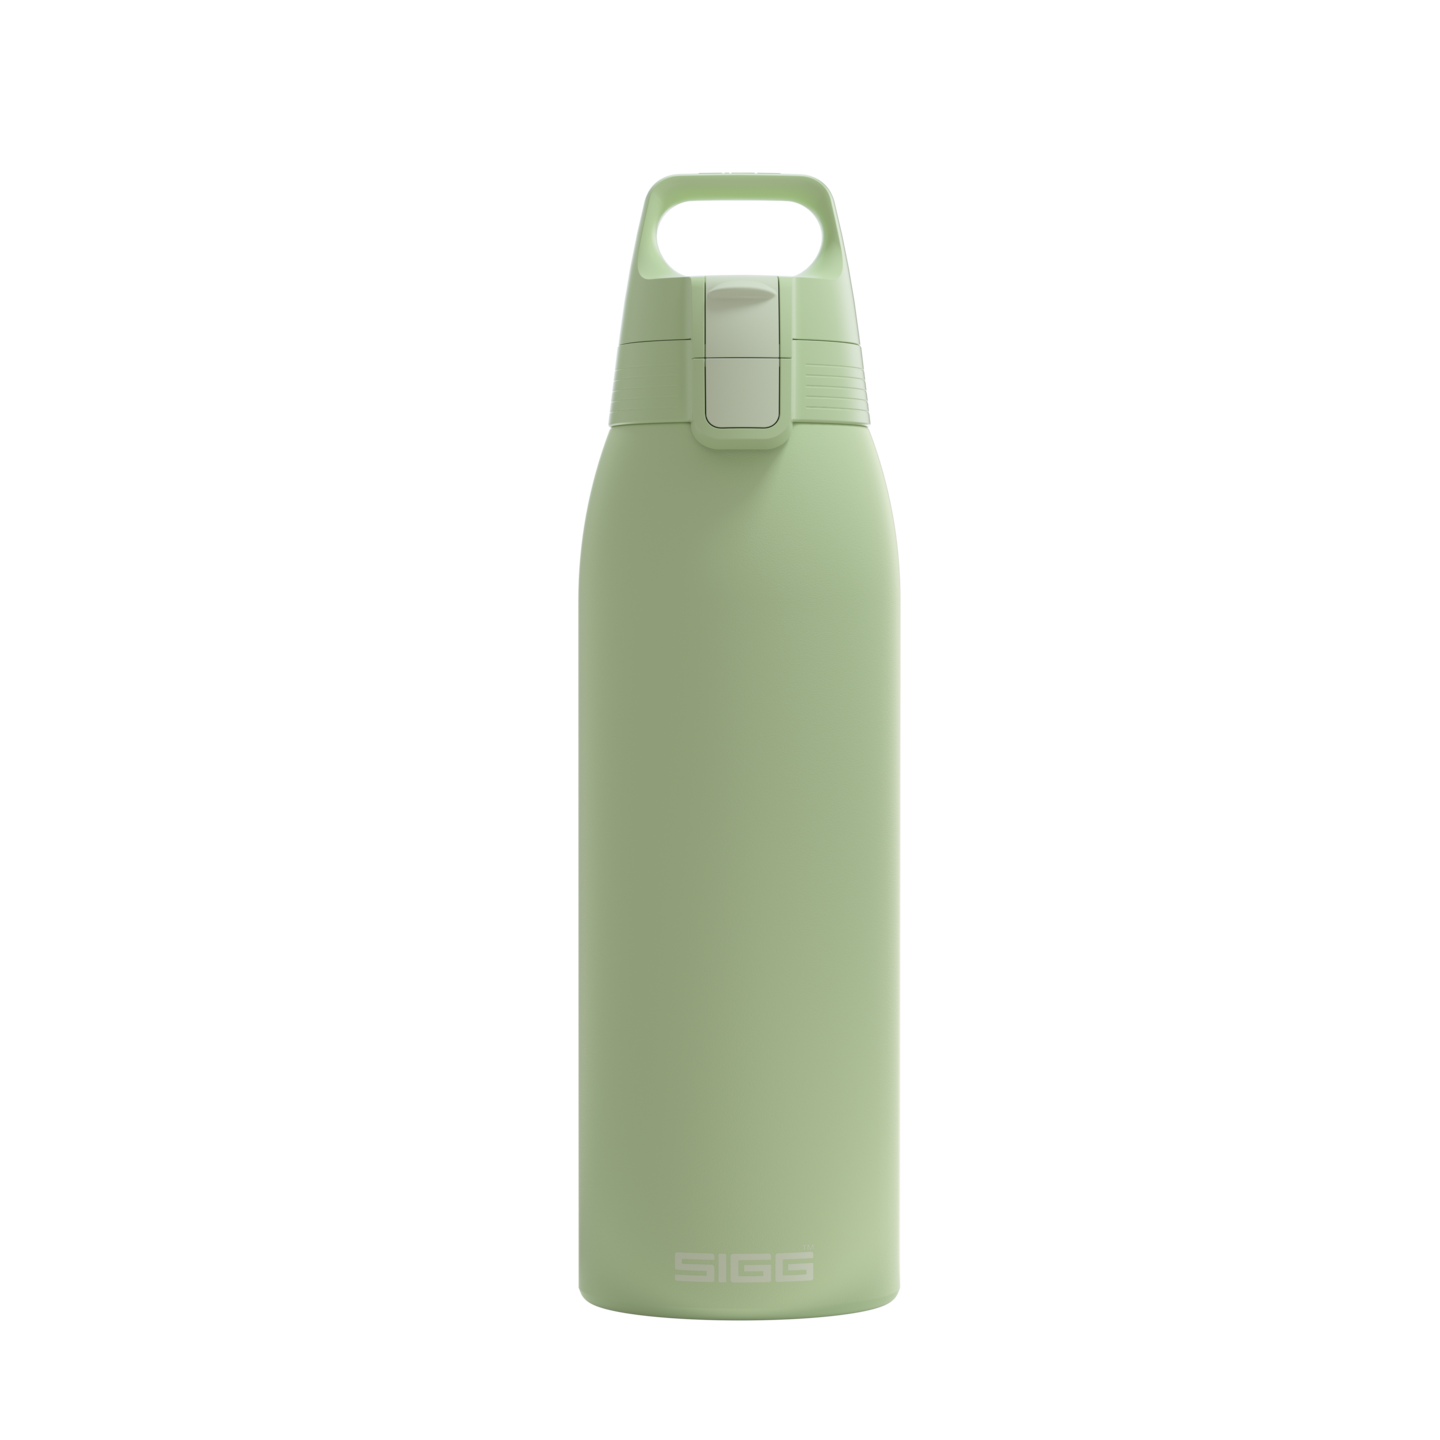 Shield Therm One Eco Green 1.0 L